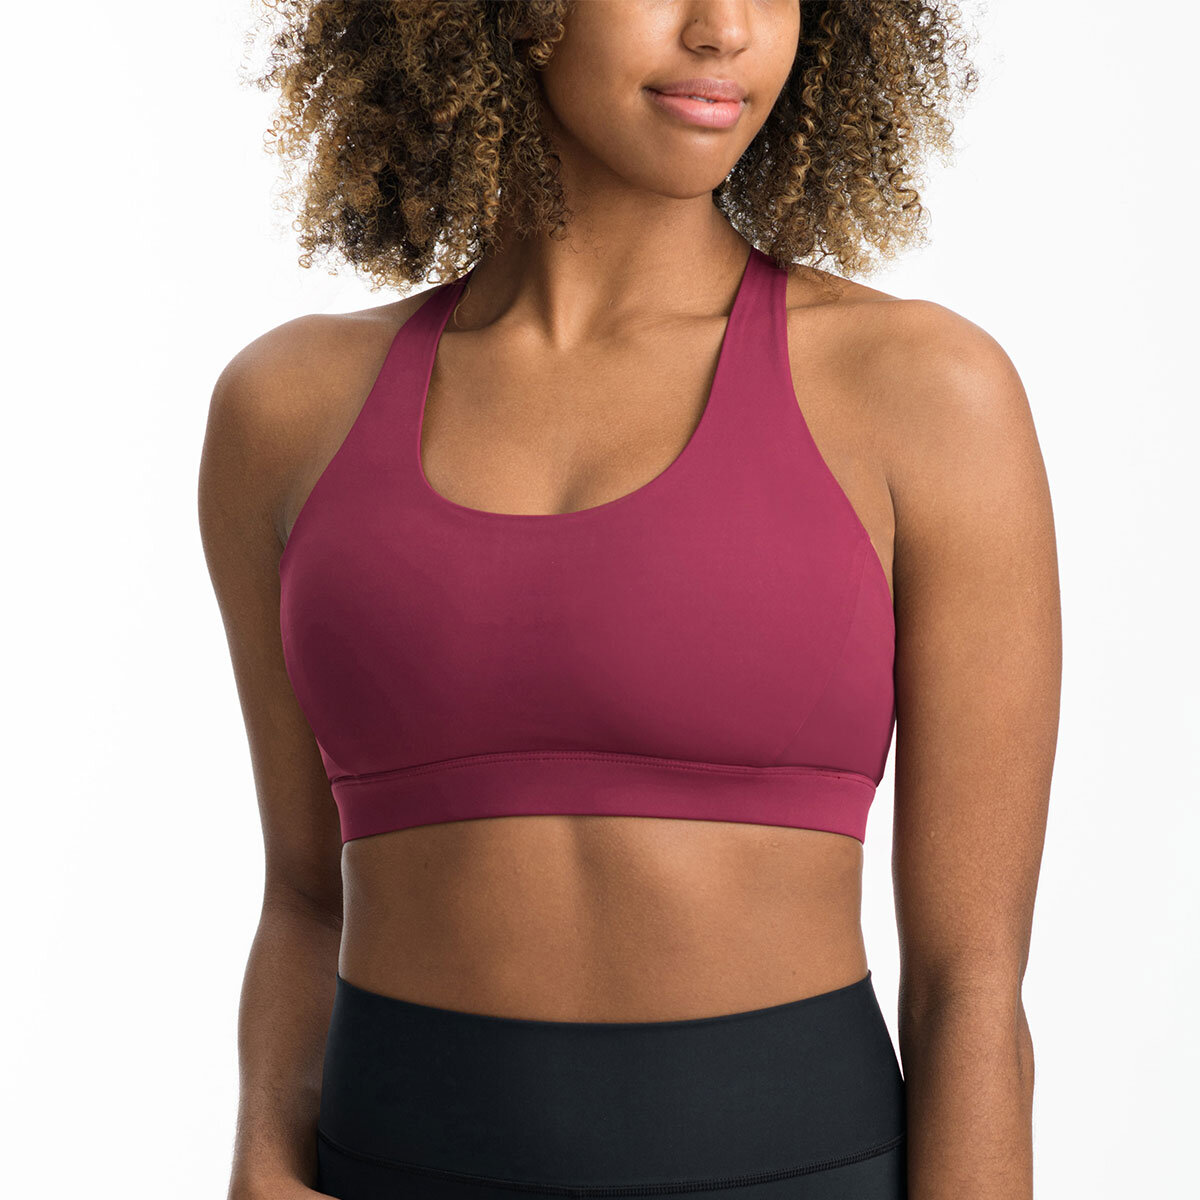 costcofindsca - This sports bra @lole is just $19.99 for a